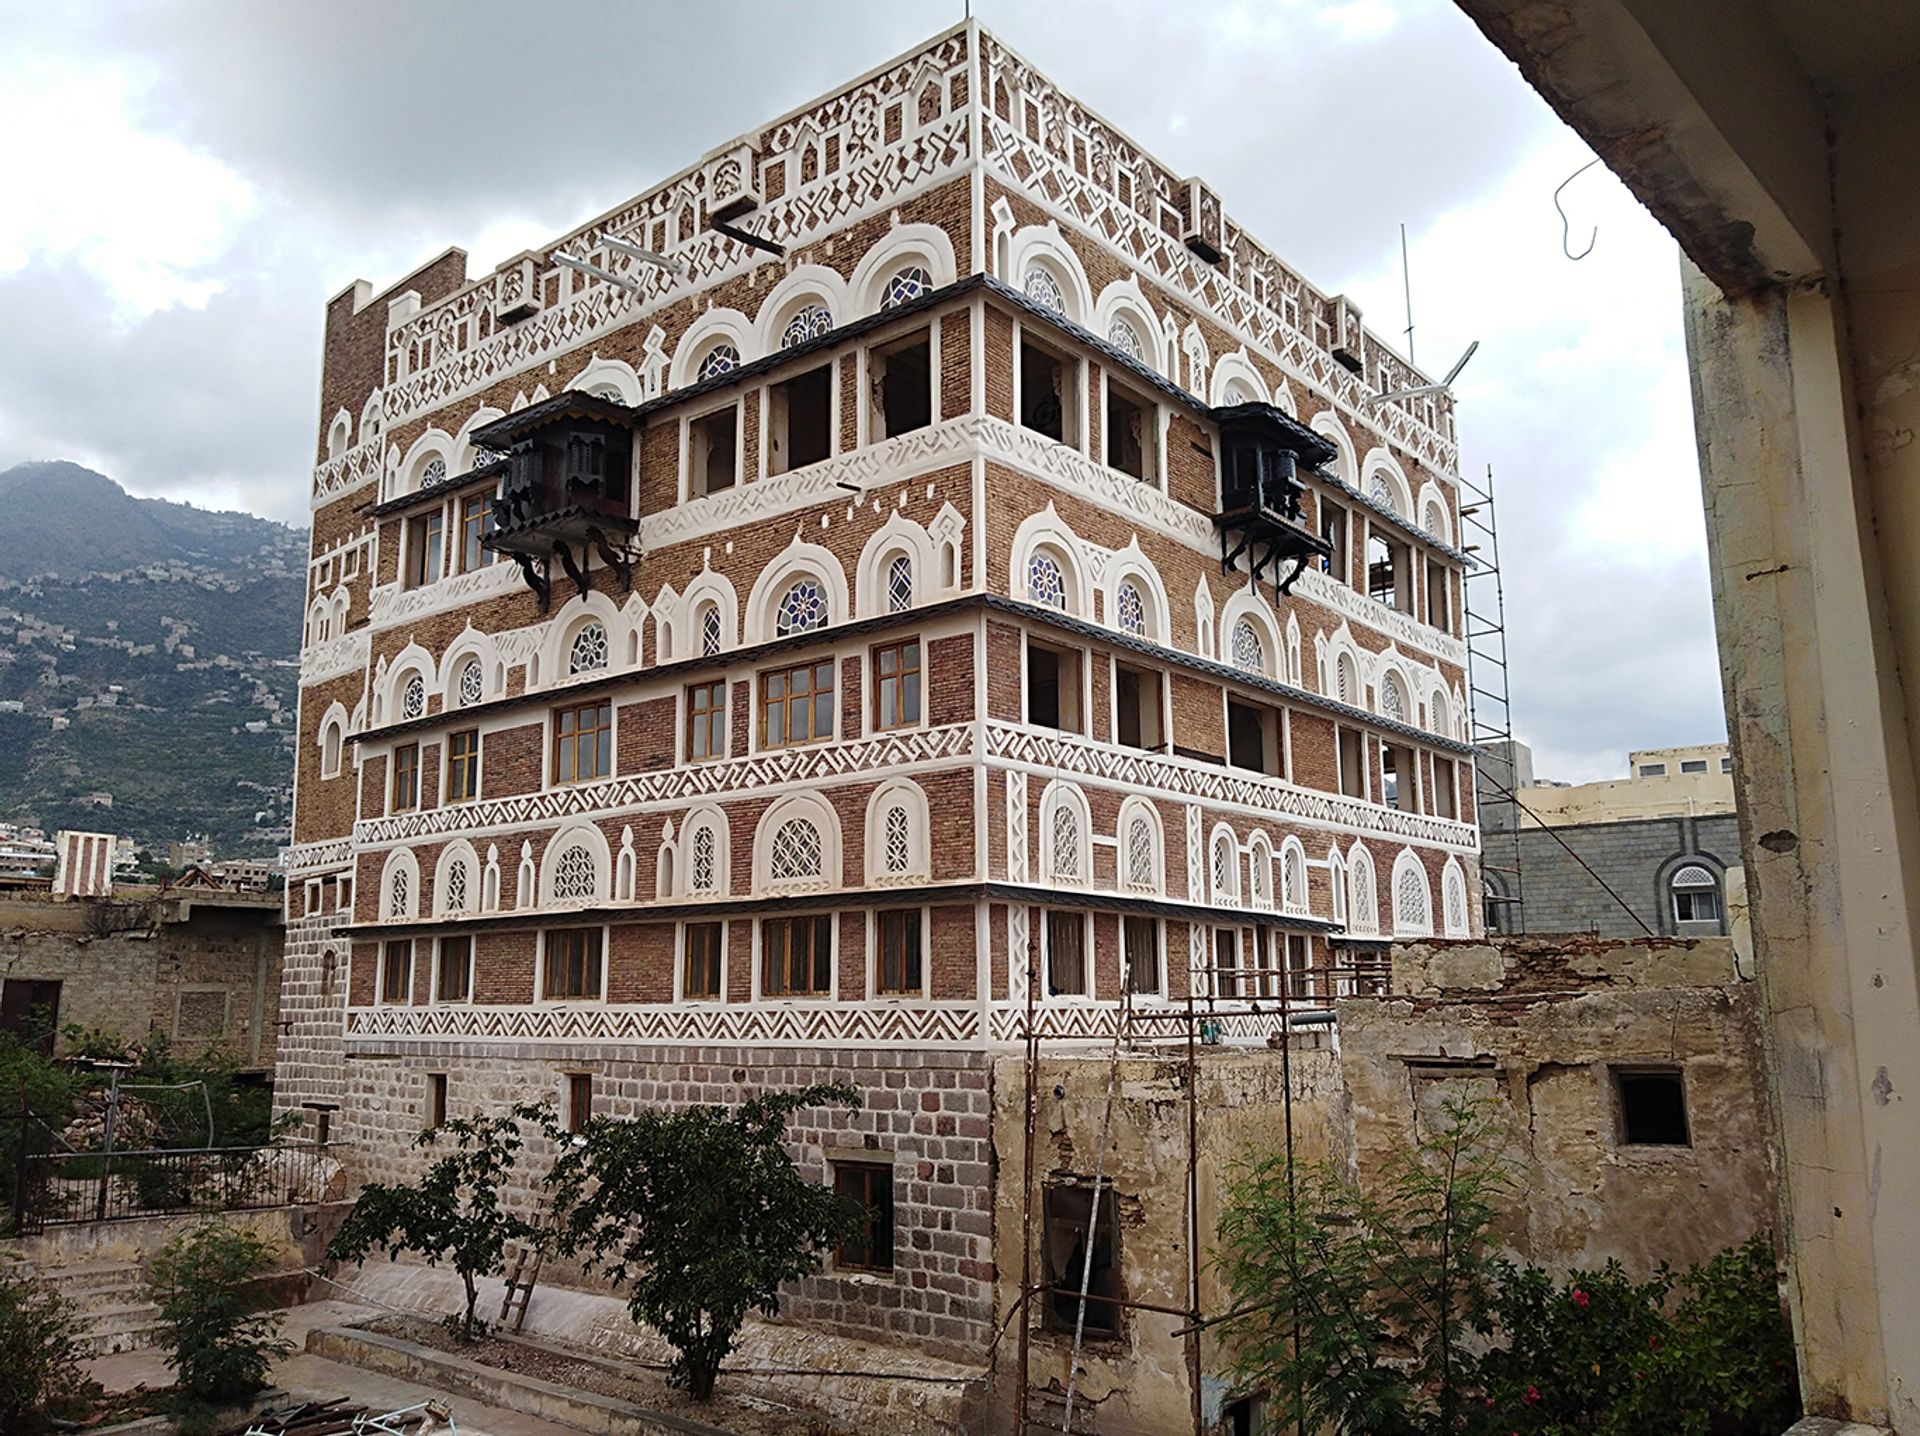 The eastern and northern façades of the Imam Palace in Taiz after conservation Courtesy of World Monuments Fund